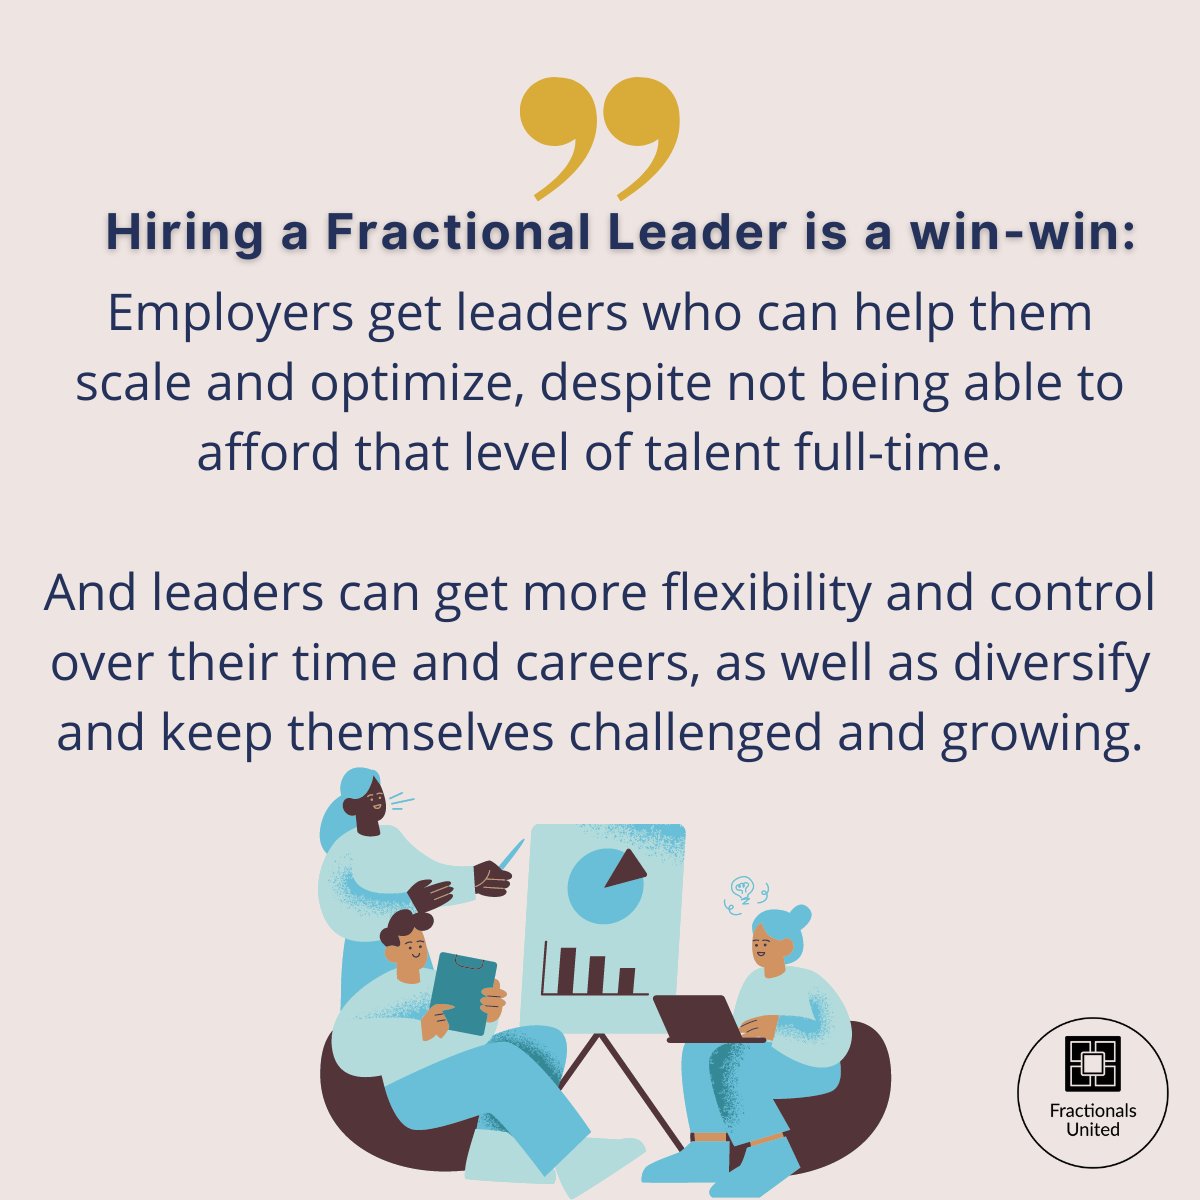 Hiring a Fractional Leader is definitely a win-win situation for both the employers as well as the leaders. 
#fractionalleader #fractionalexecutive #fractionalsunited #leadership